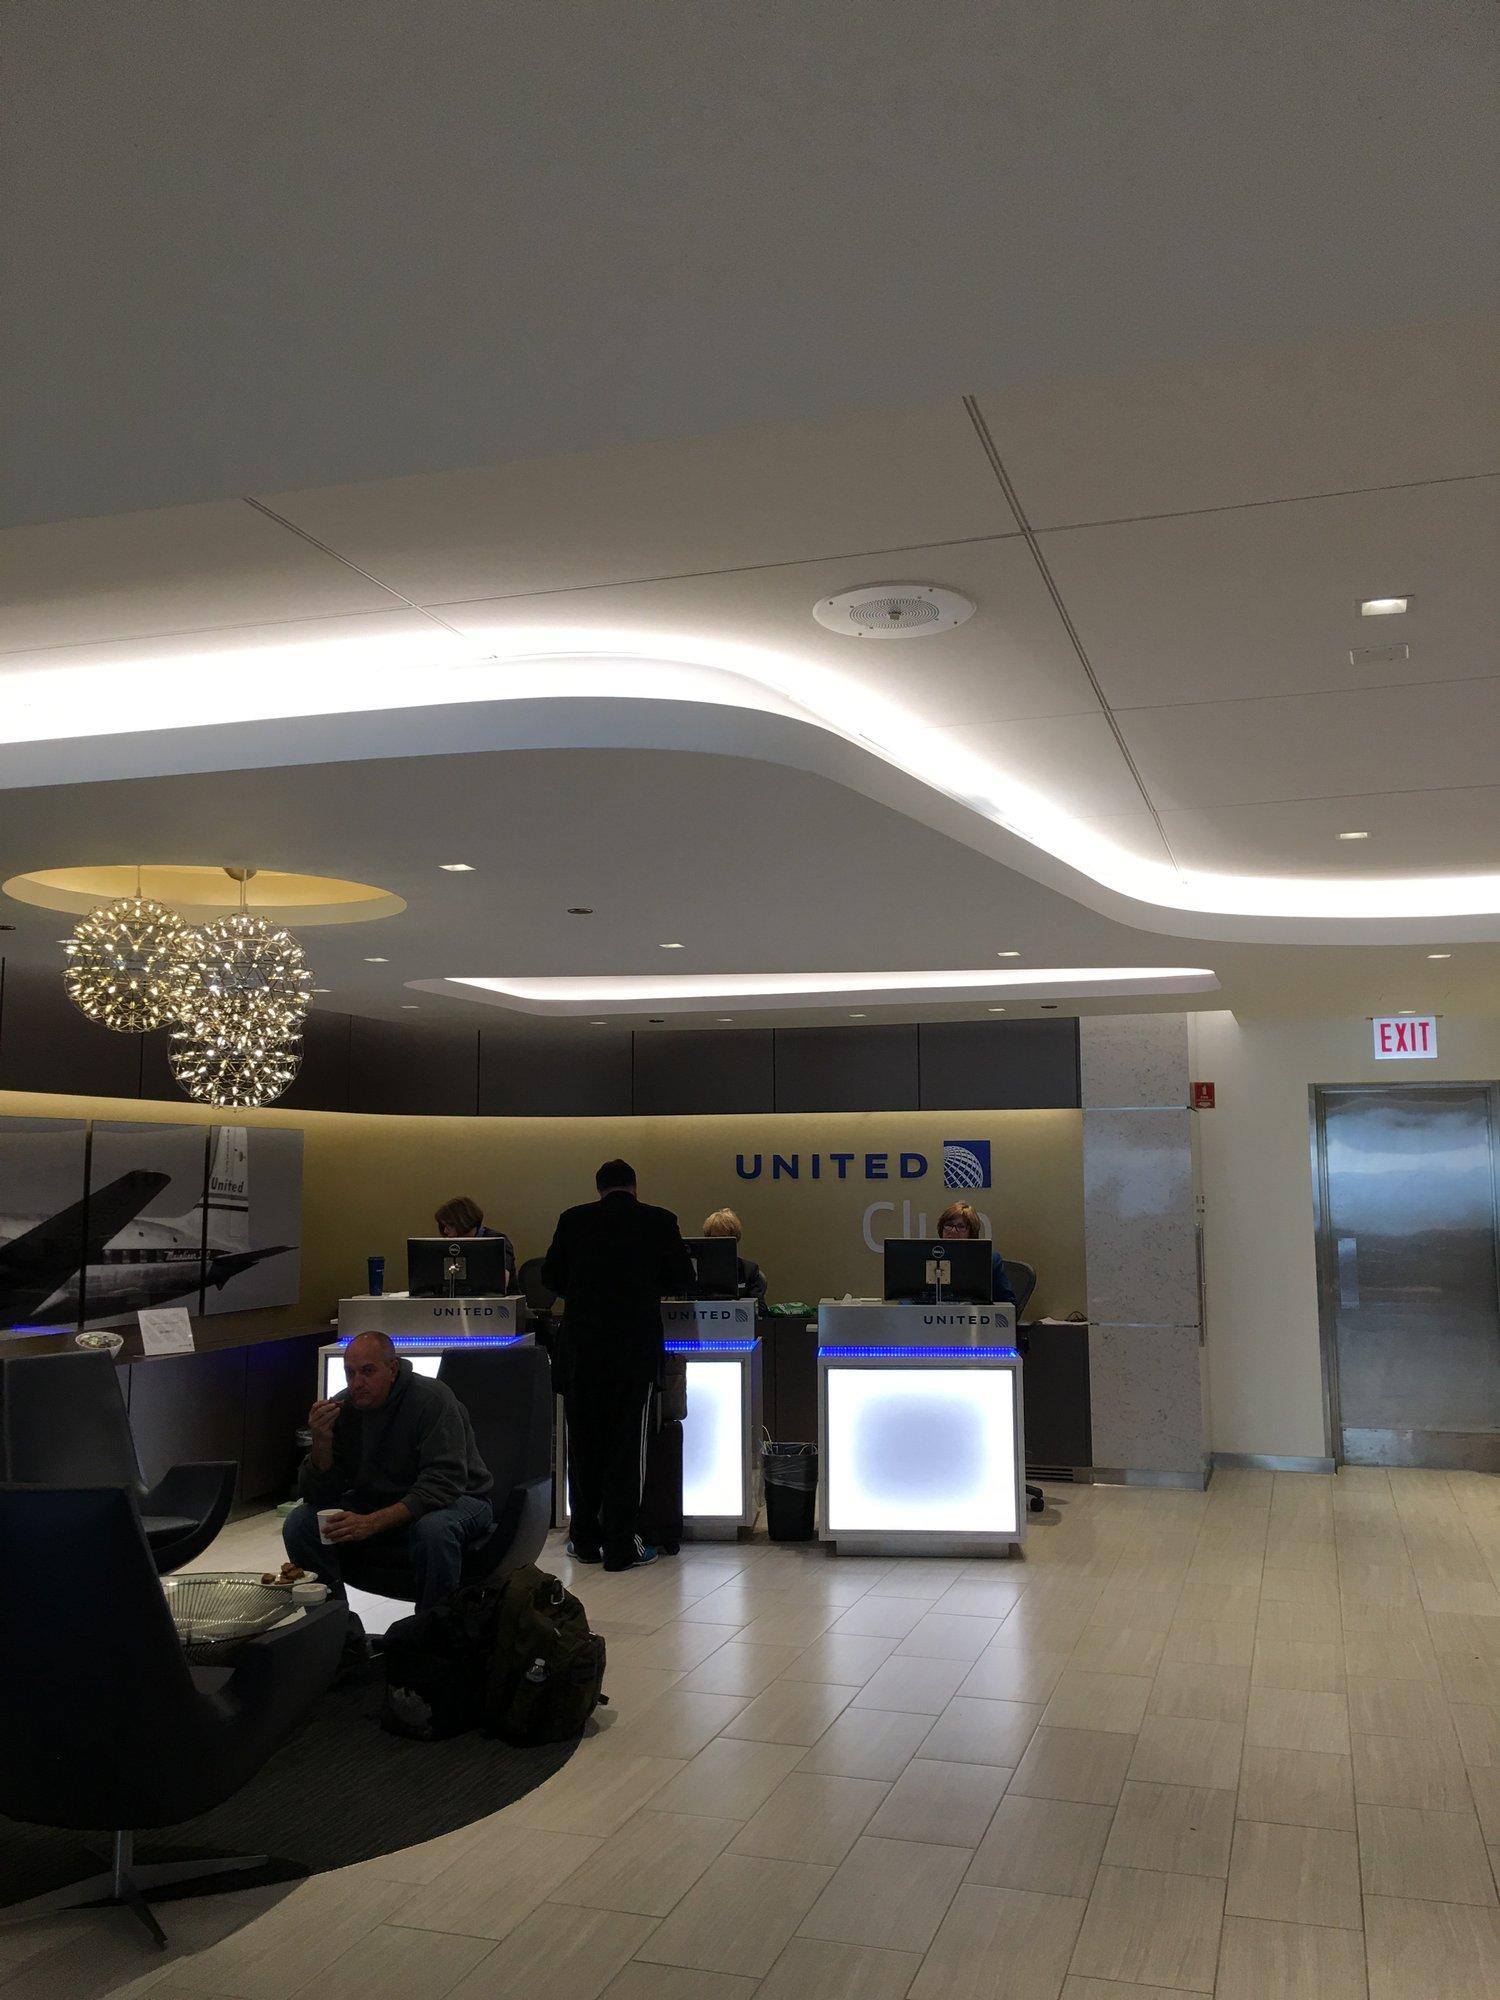 United Airlines United Club (Gate B18) image 7 of 7